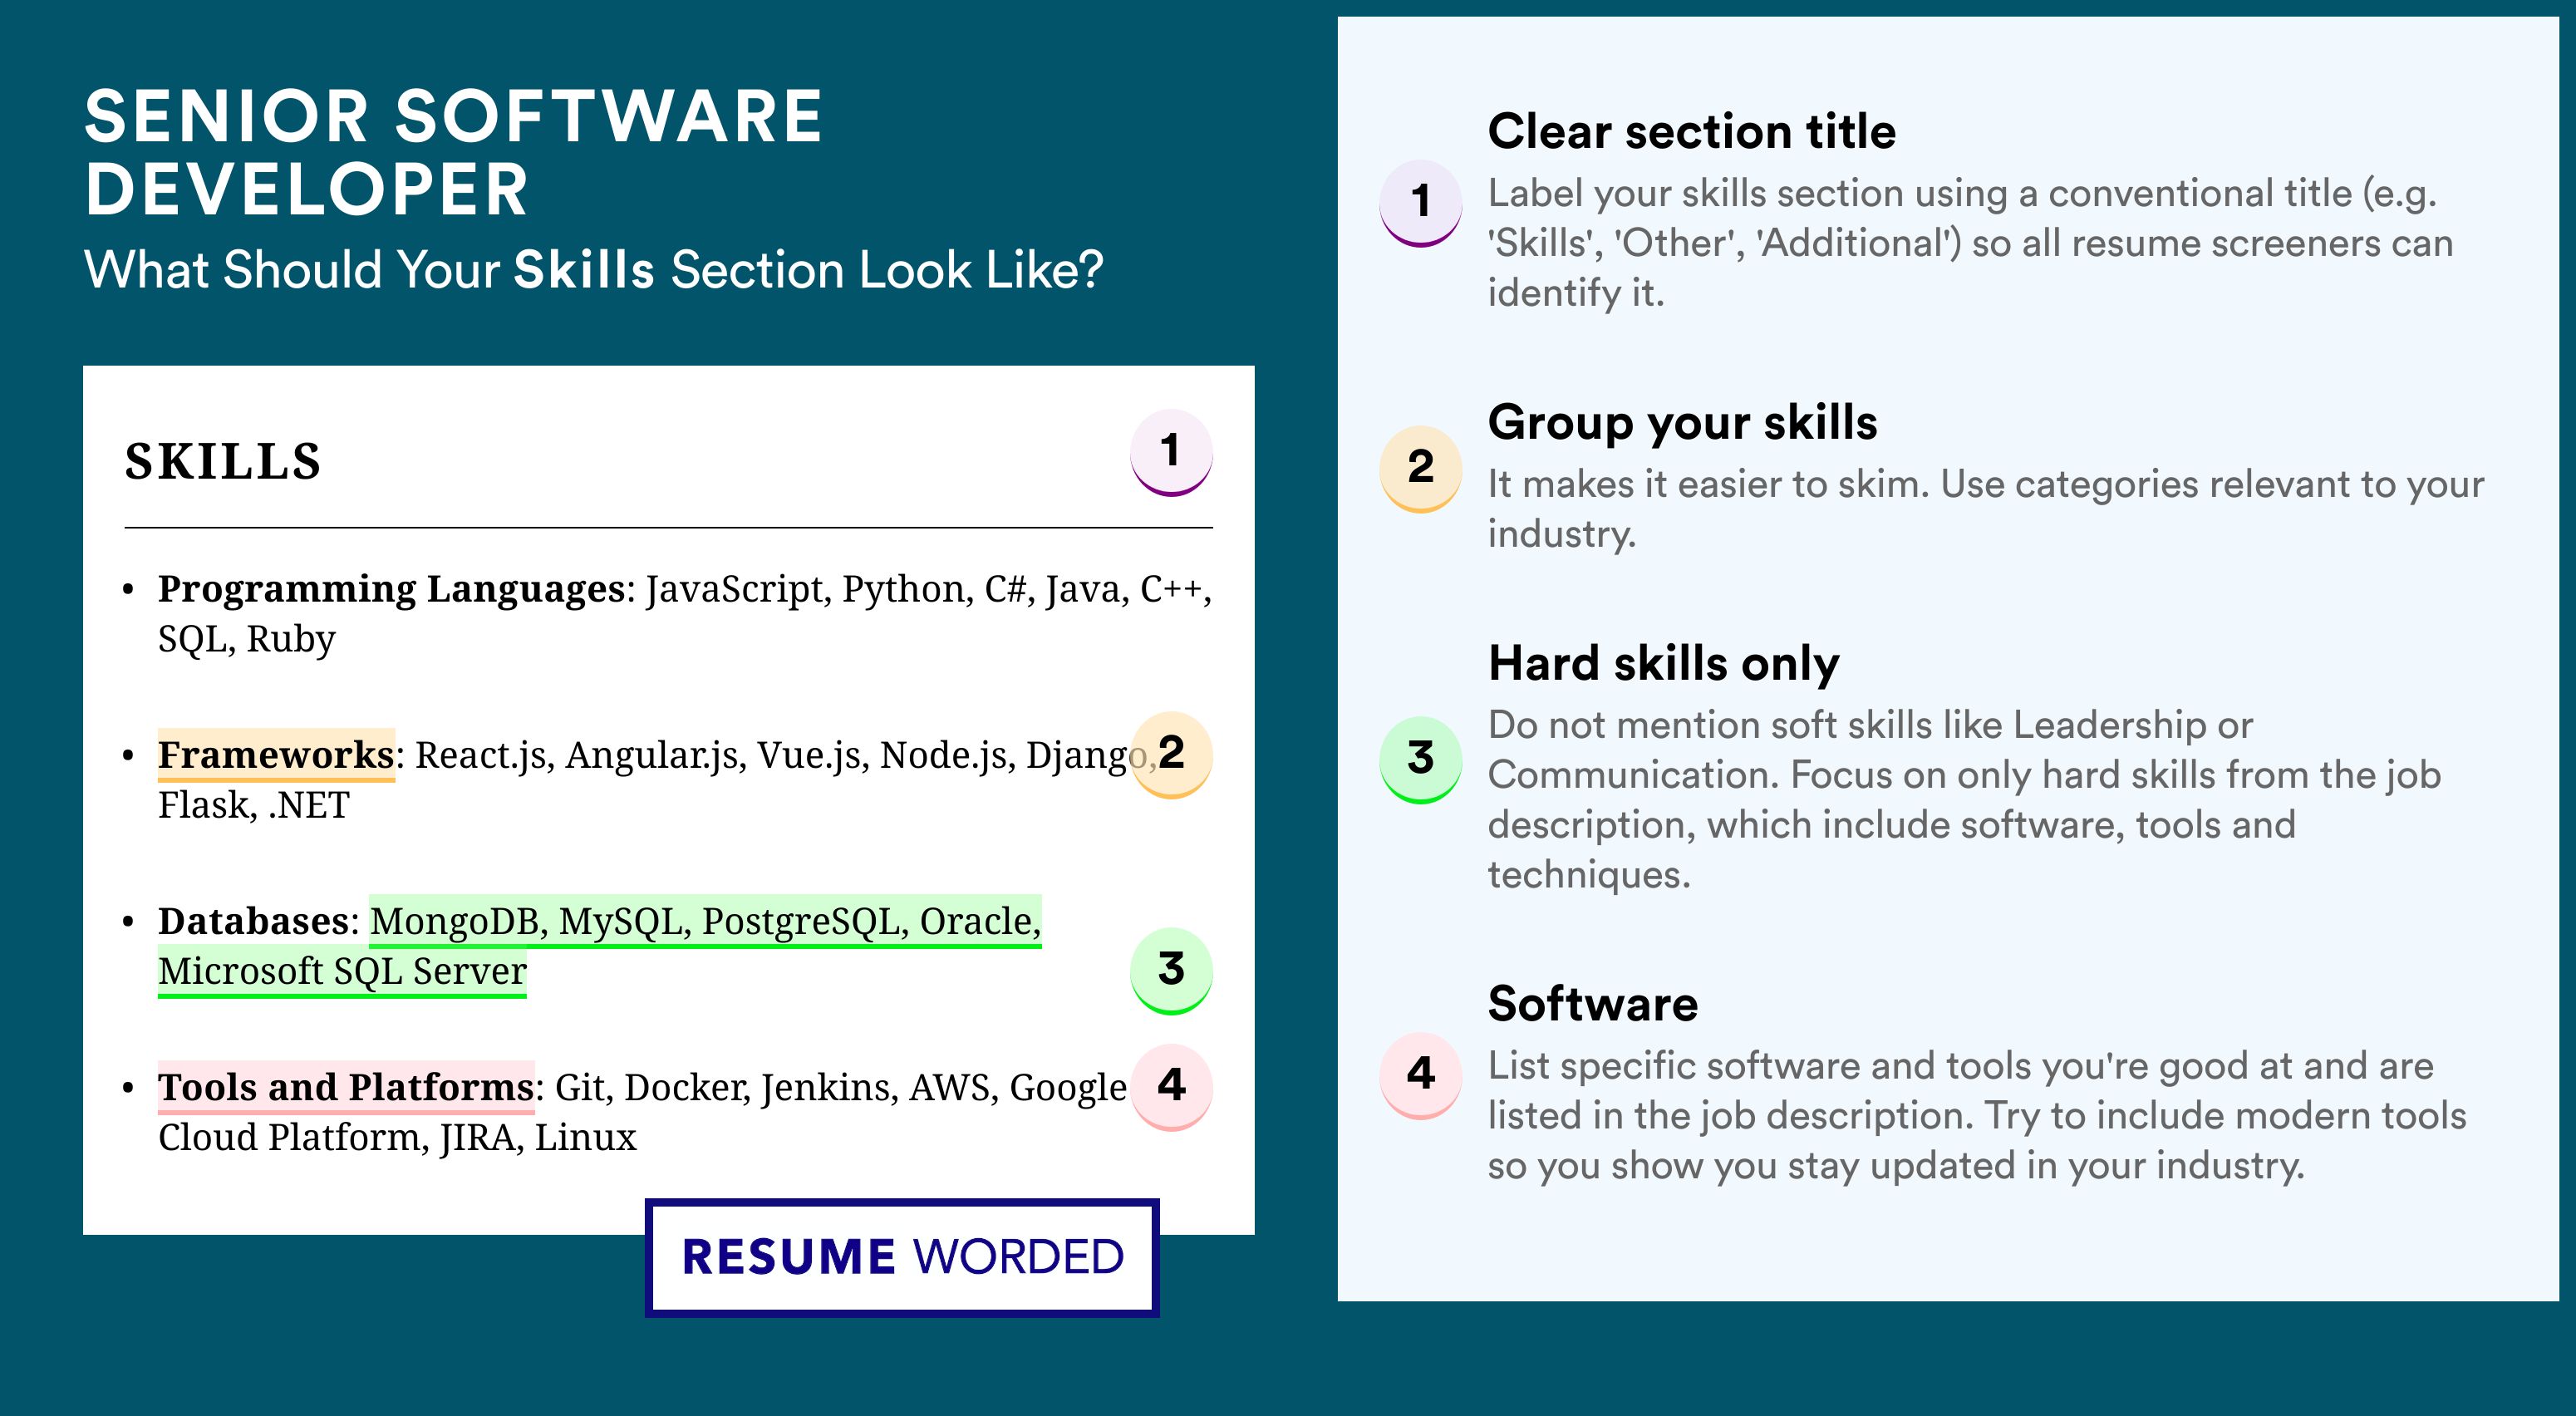 How To Write Your Skills Section - Senior Software Developer Roles